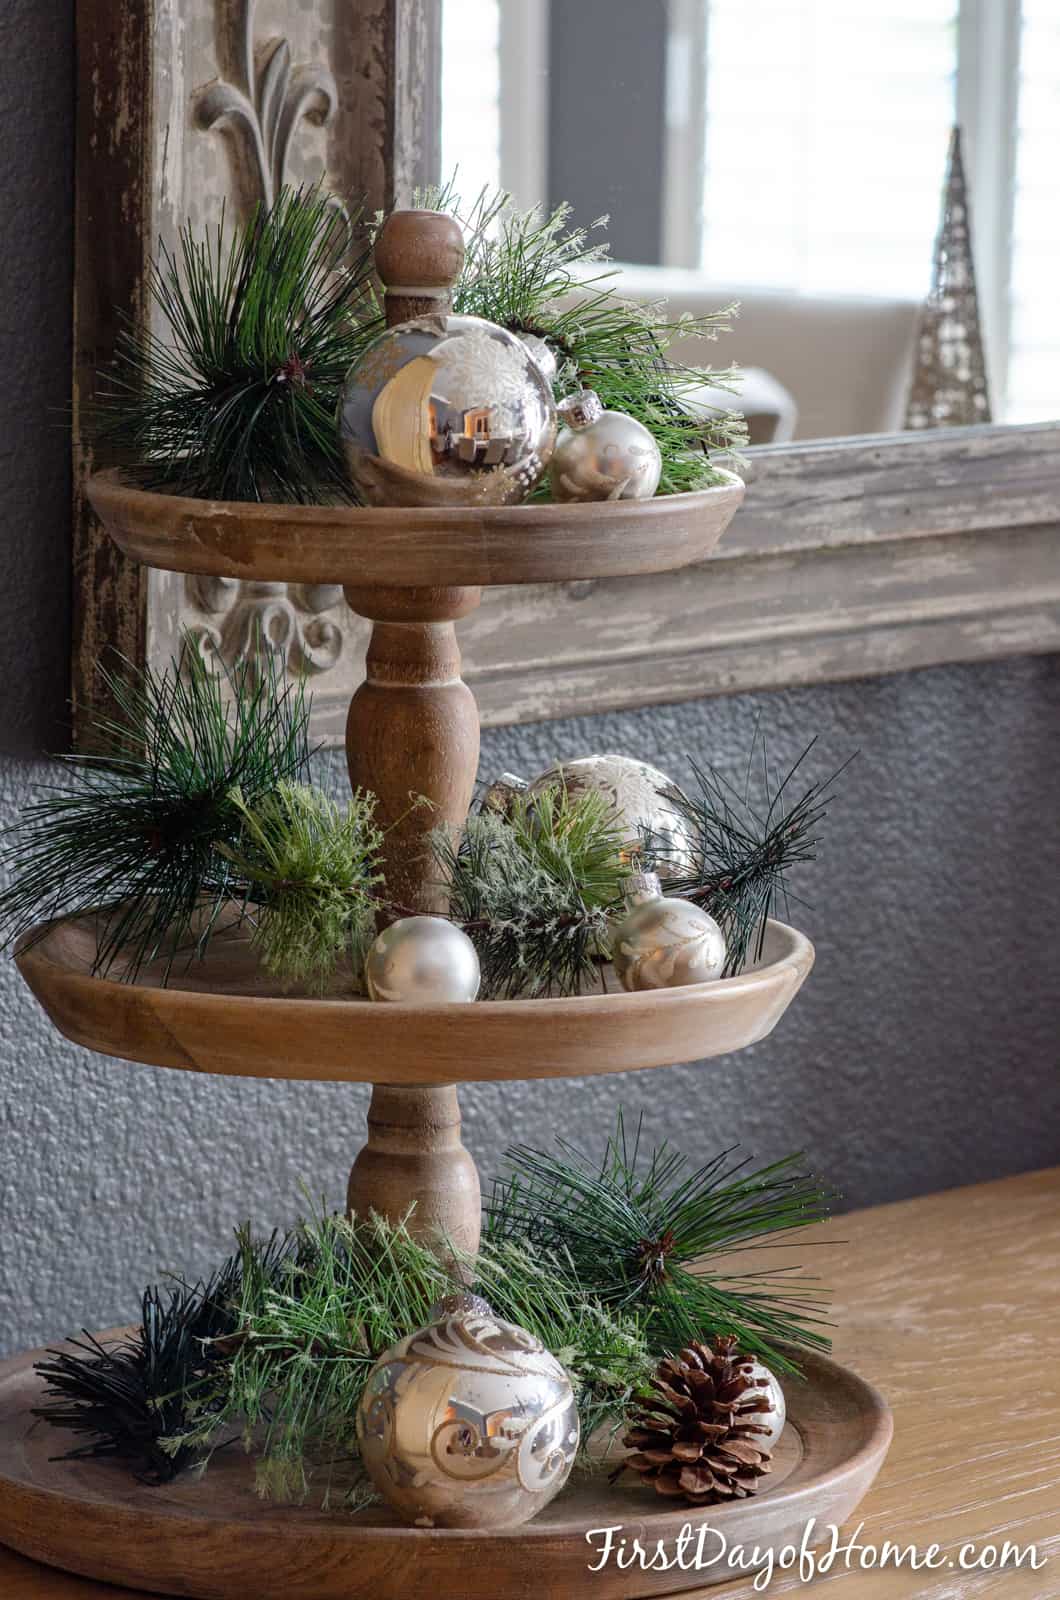 Three tiered tray decorated for Christmas with faux pine greenery and silver ornaments